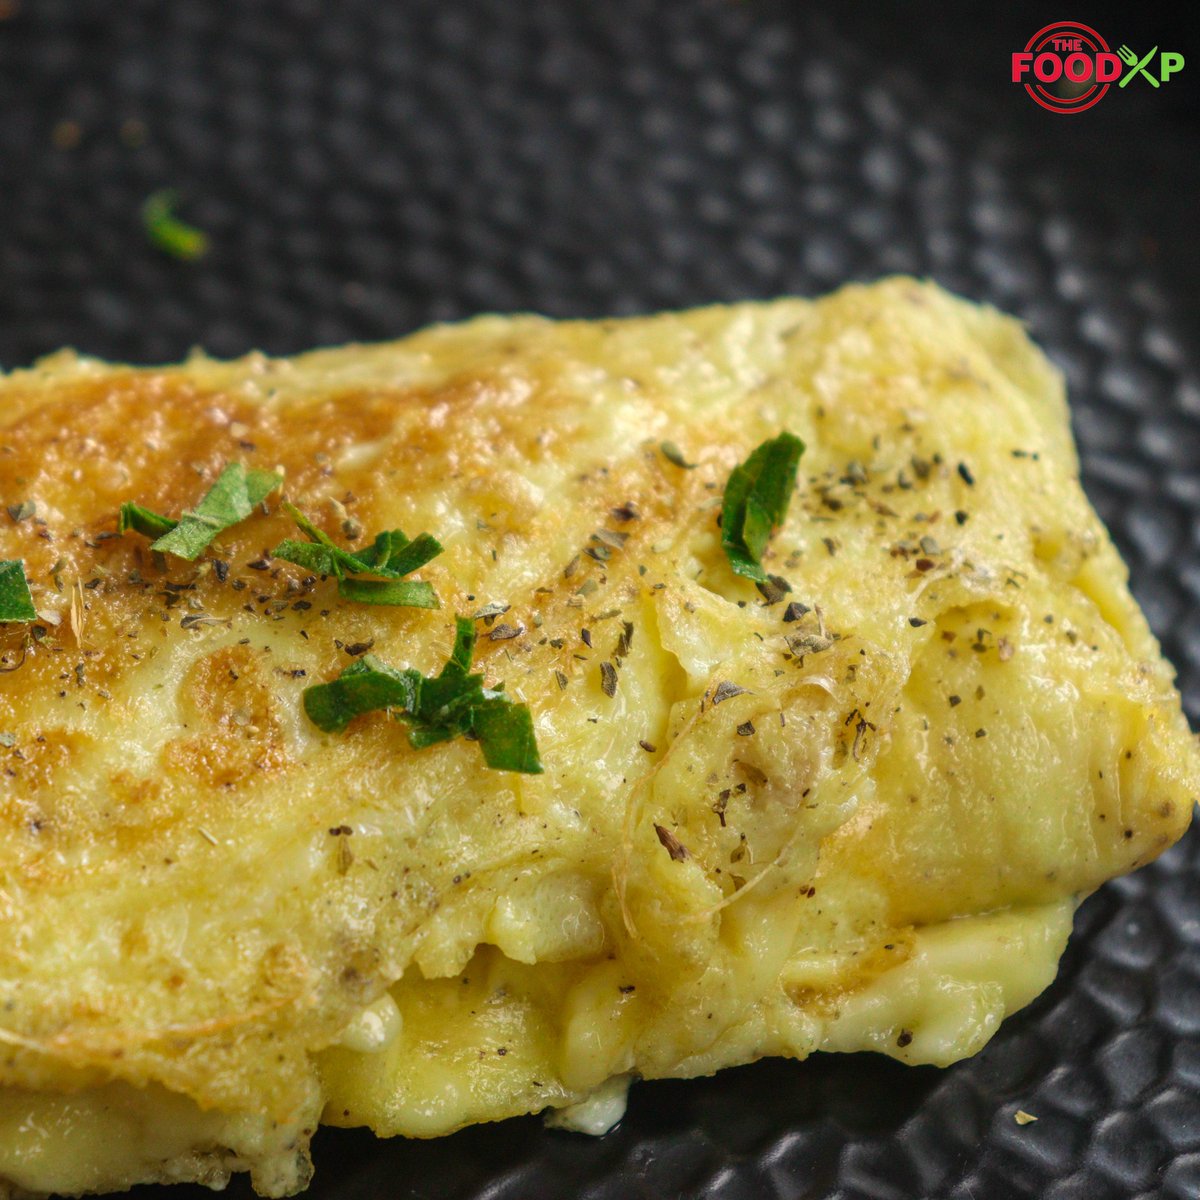 Put some yummy in your tummy with the help of Gordon Ramsay’s perfect omelet. All you need for that is his secret recipe. Well, here’s the link for all-you-need- to-know about the magical recipe.
https://t.co/HirQqNud0A

#GordonRamsay #Omelet #Delicious #Recipe https://t.co/oSoyW0GZCU